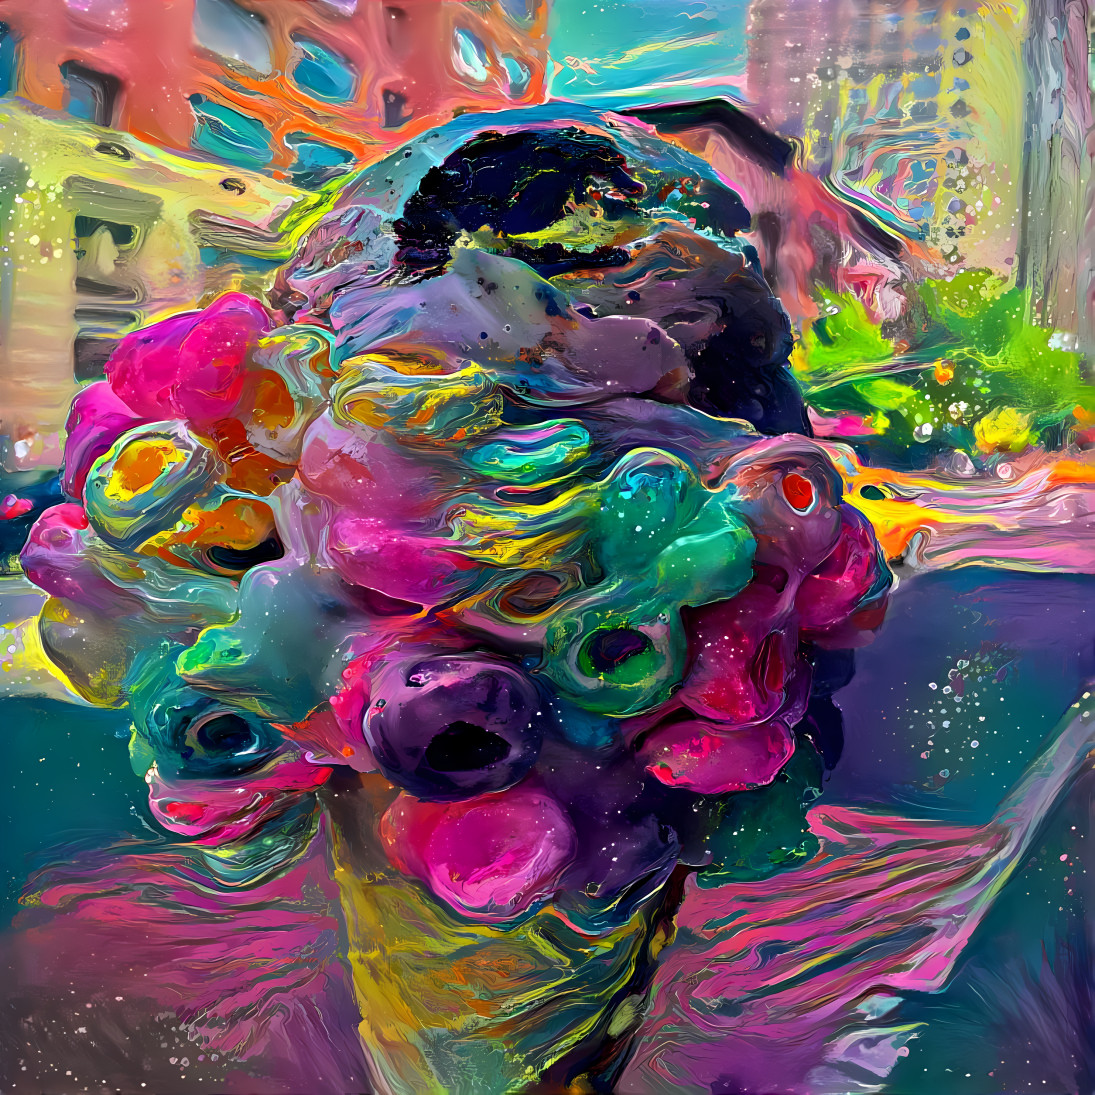 ice cream cone with fruit loops, organic painting